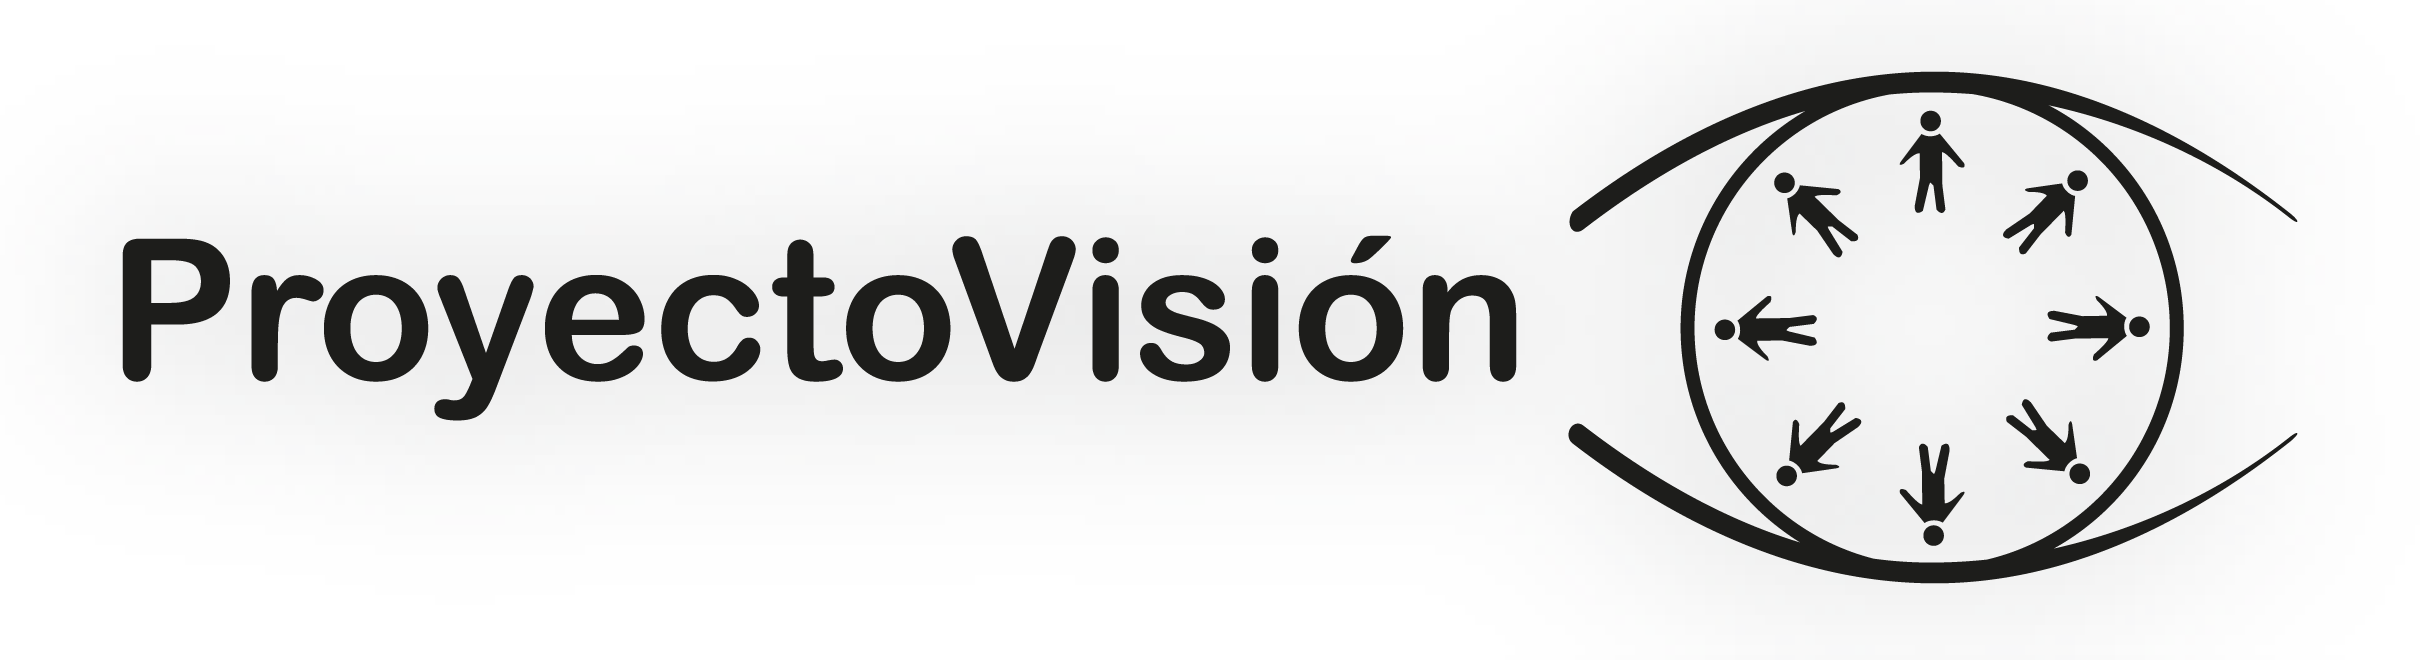 Proyecto Vision